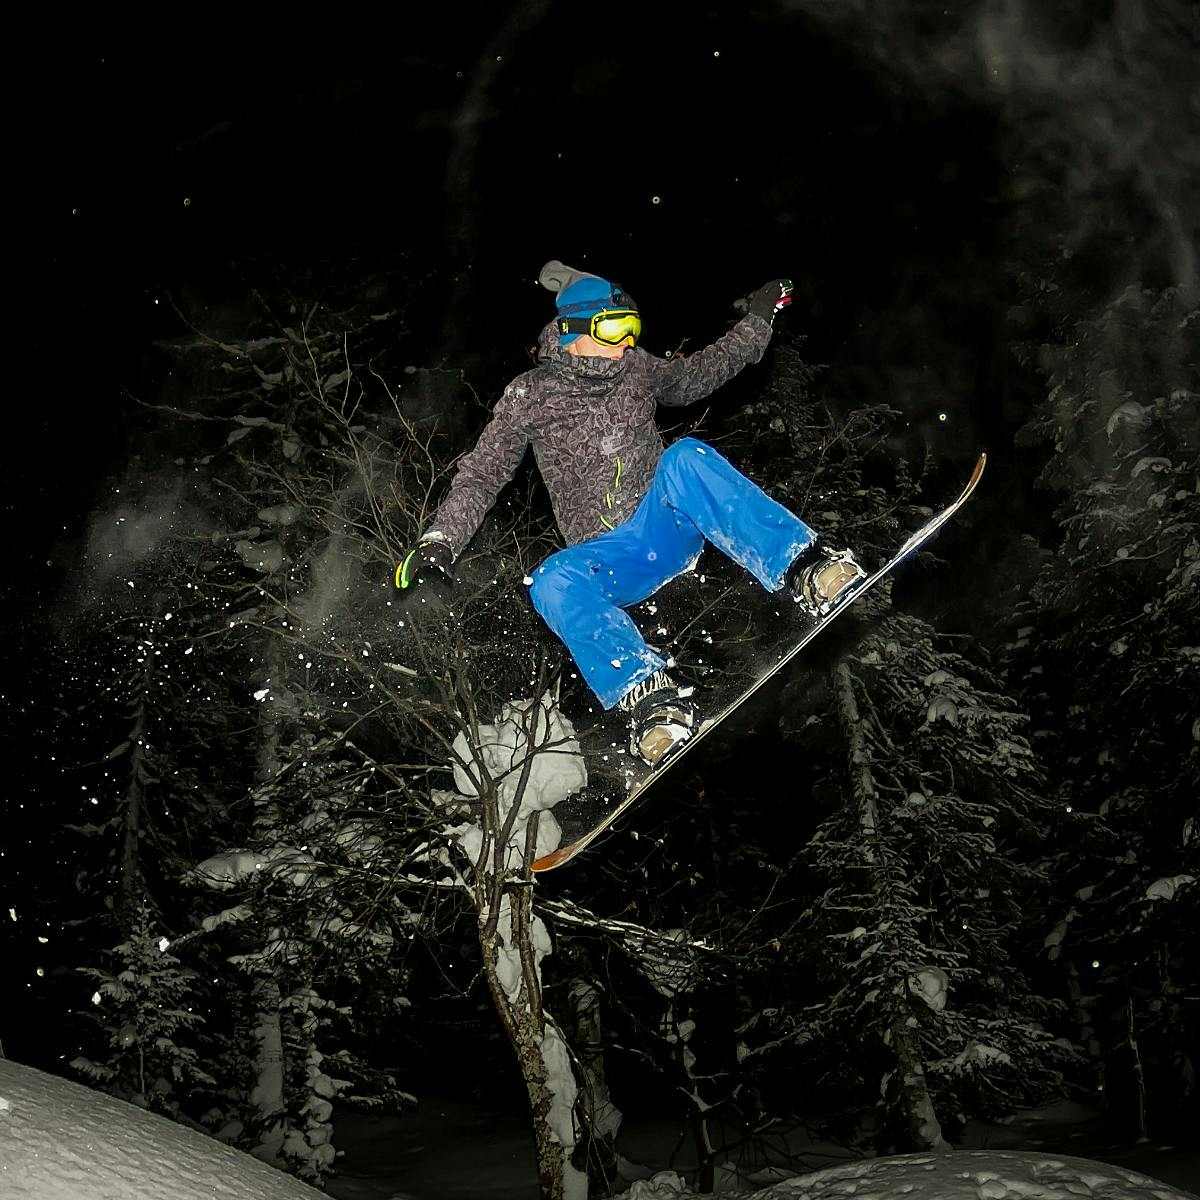 Nightime snowboarding at Kelly Canyon in Ririe, Idaho.